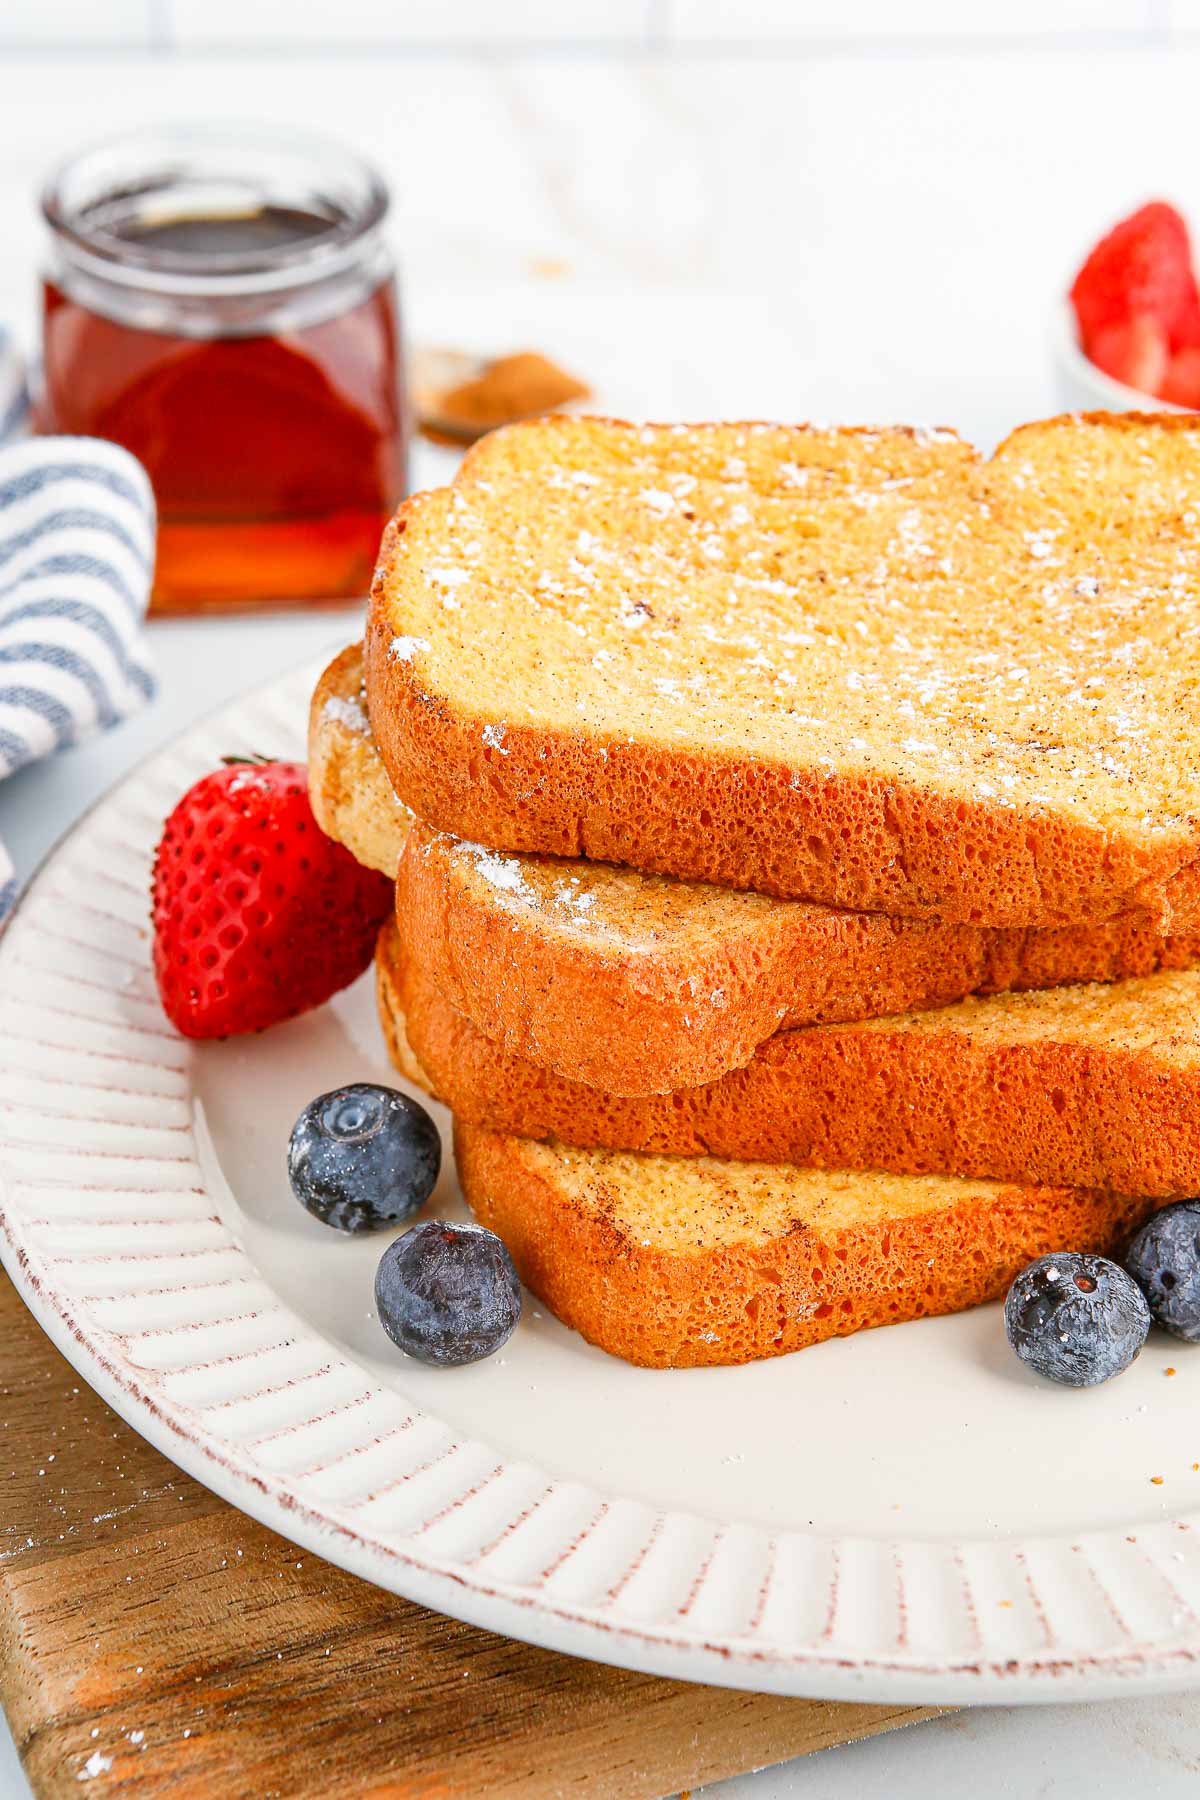 A stack of french toast on a white plate.